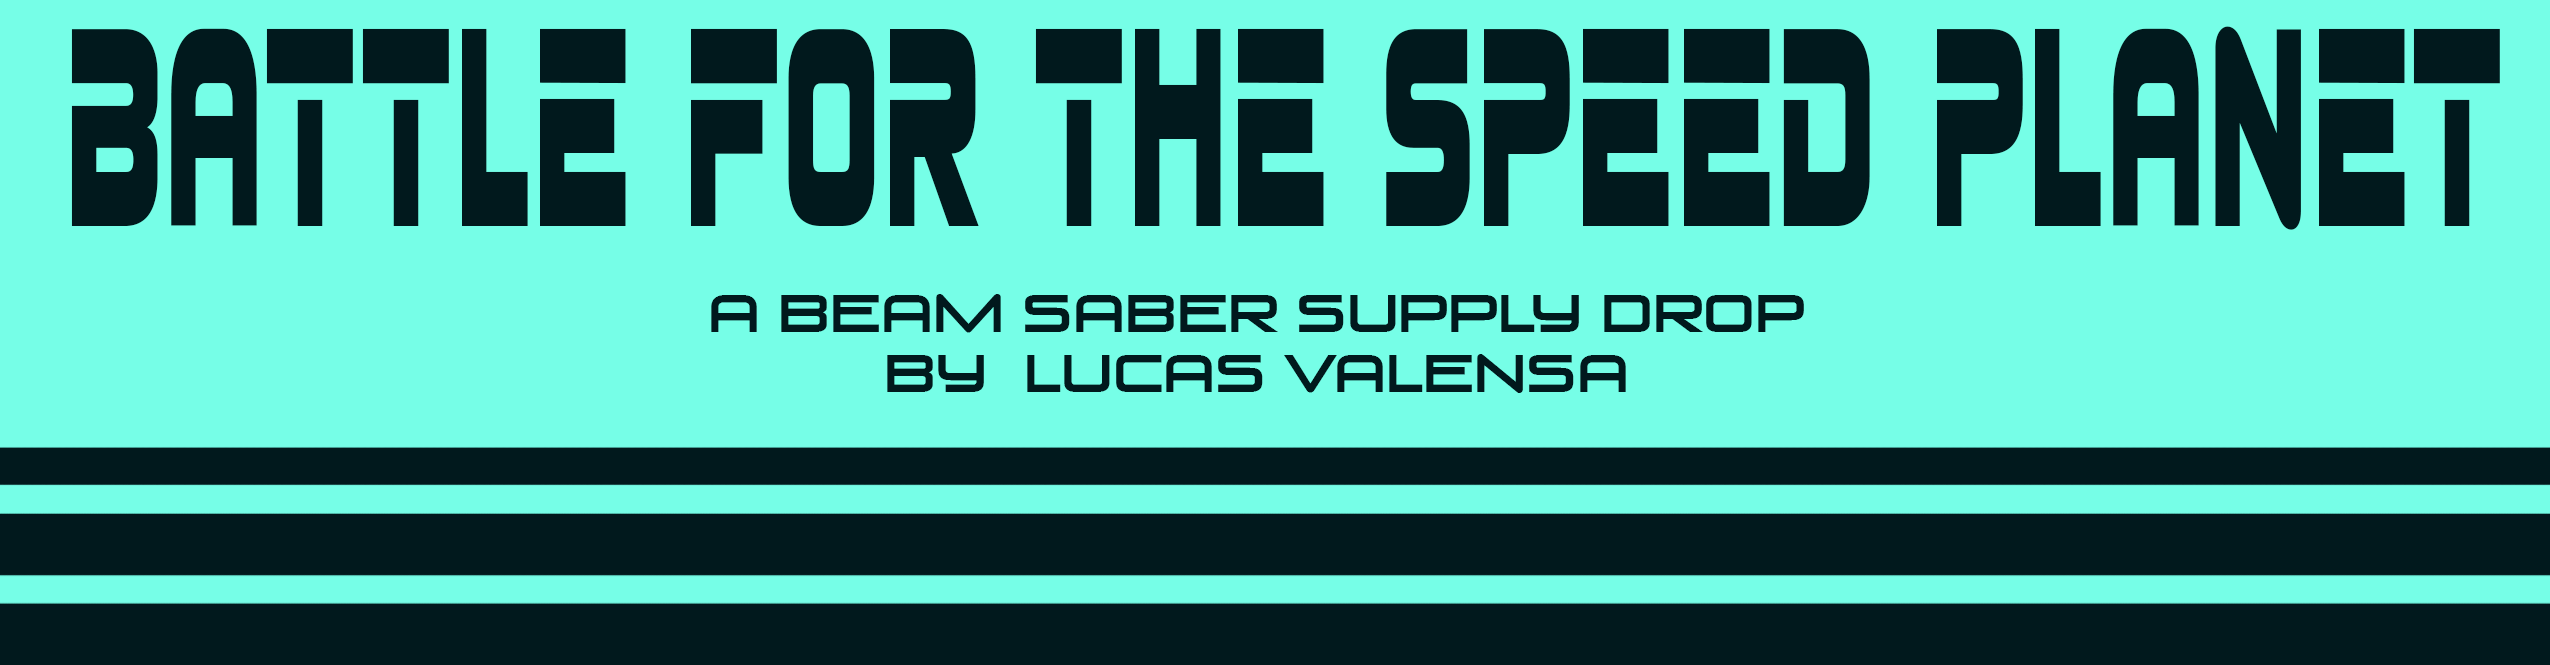 Battle For The Speed Planet: A Beam Saber Expansion